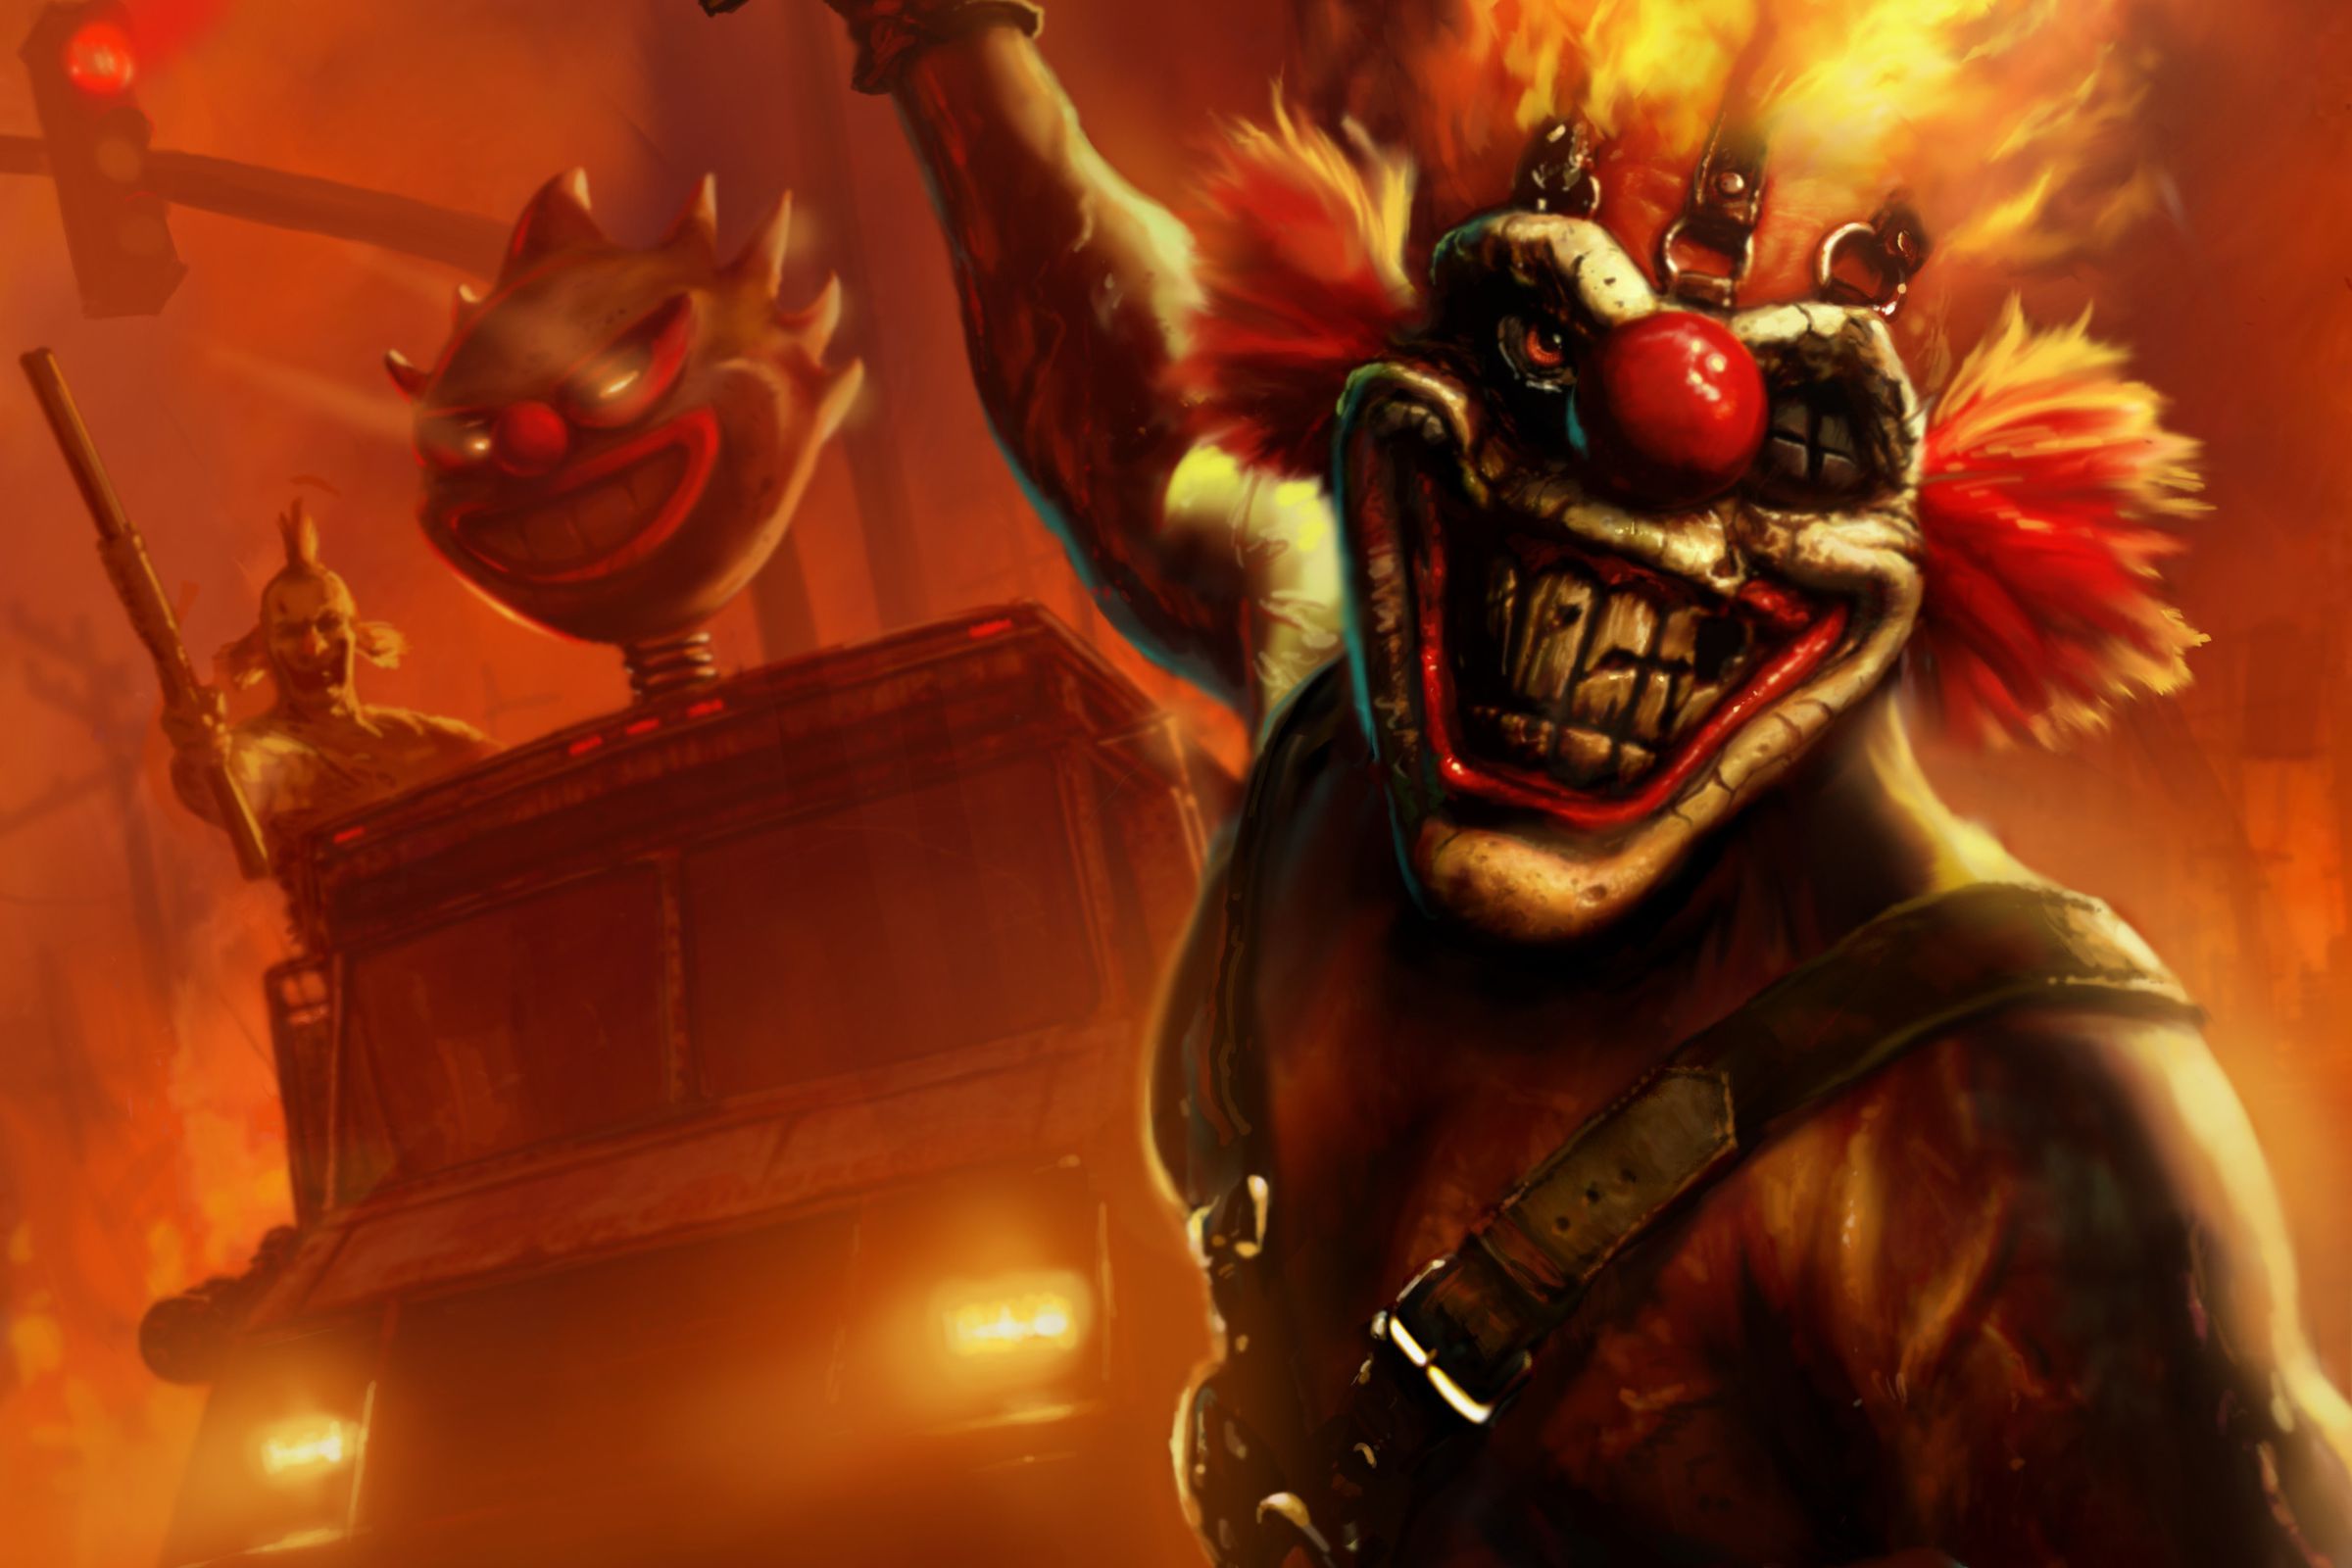 Needles Kane was the terrifying face of the Twisted Metal games.